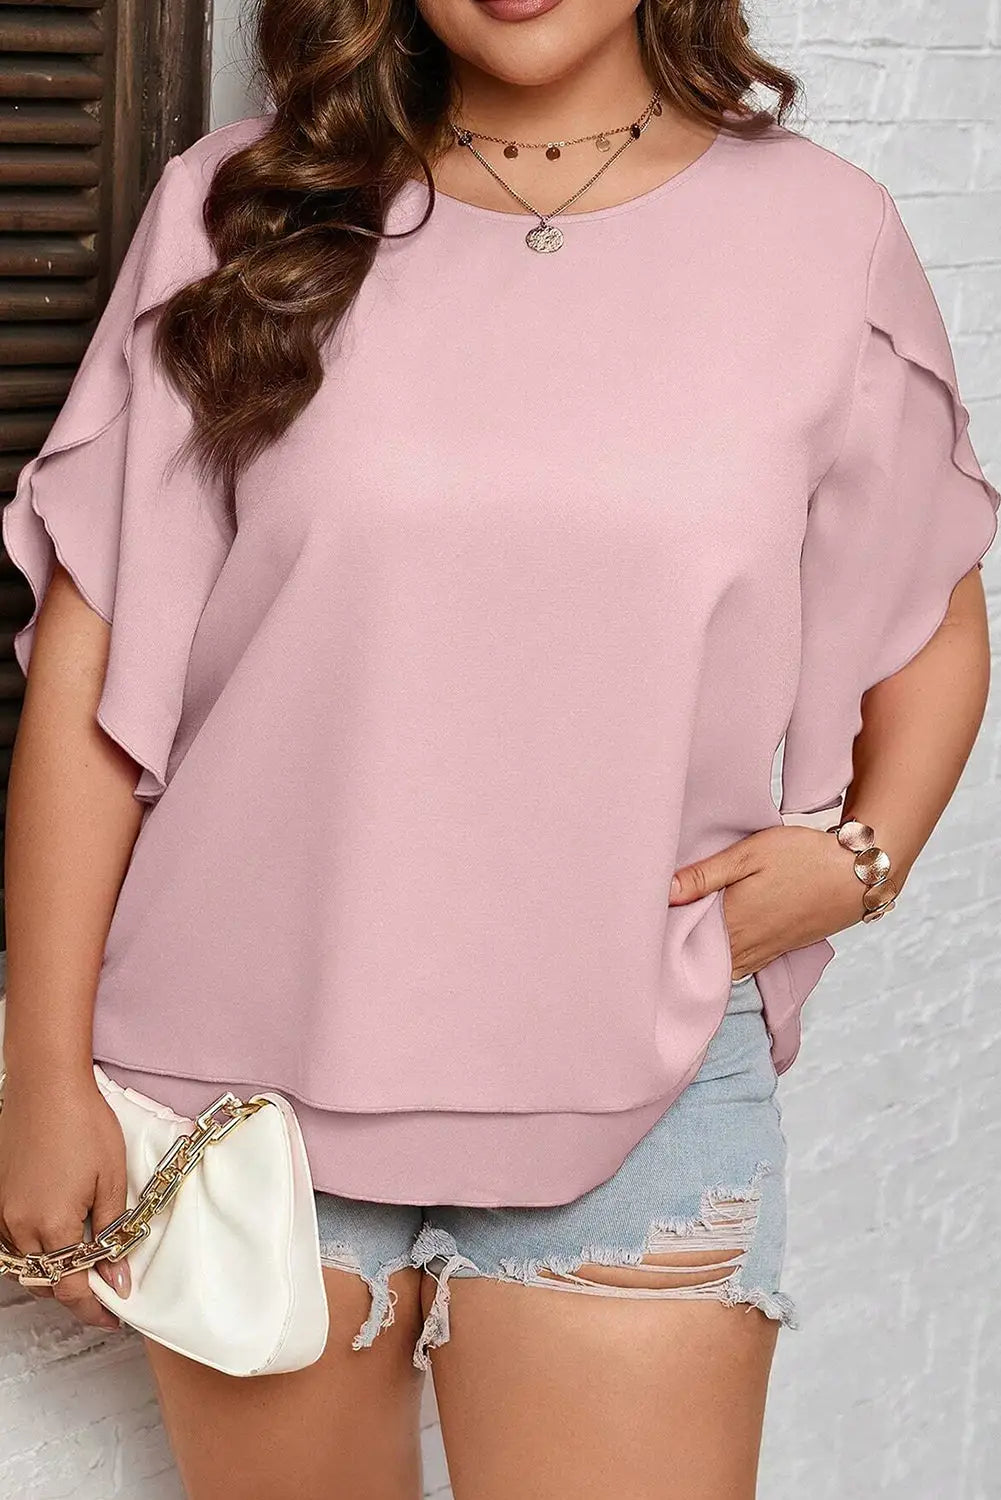 Plus size double layered blouse - light pink / 1x / 100% polyester - blouses & shirts